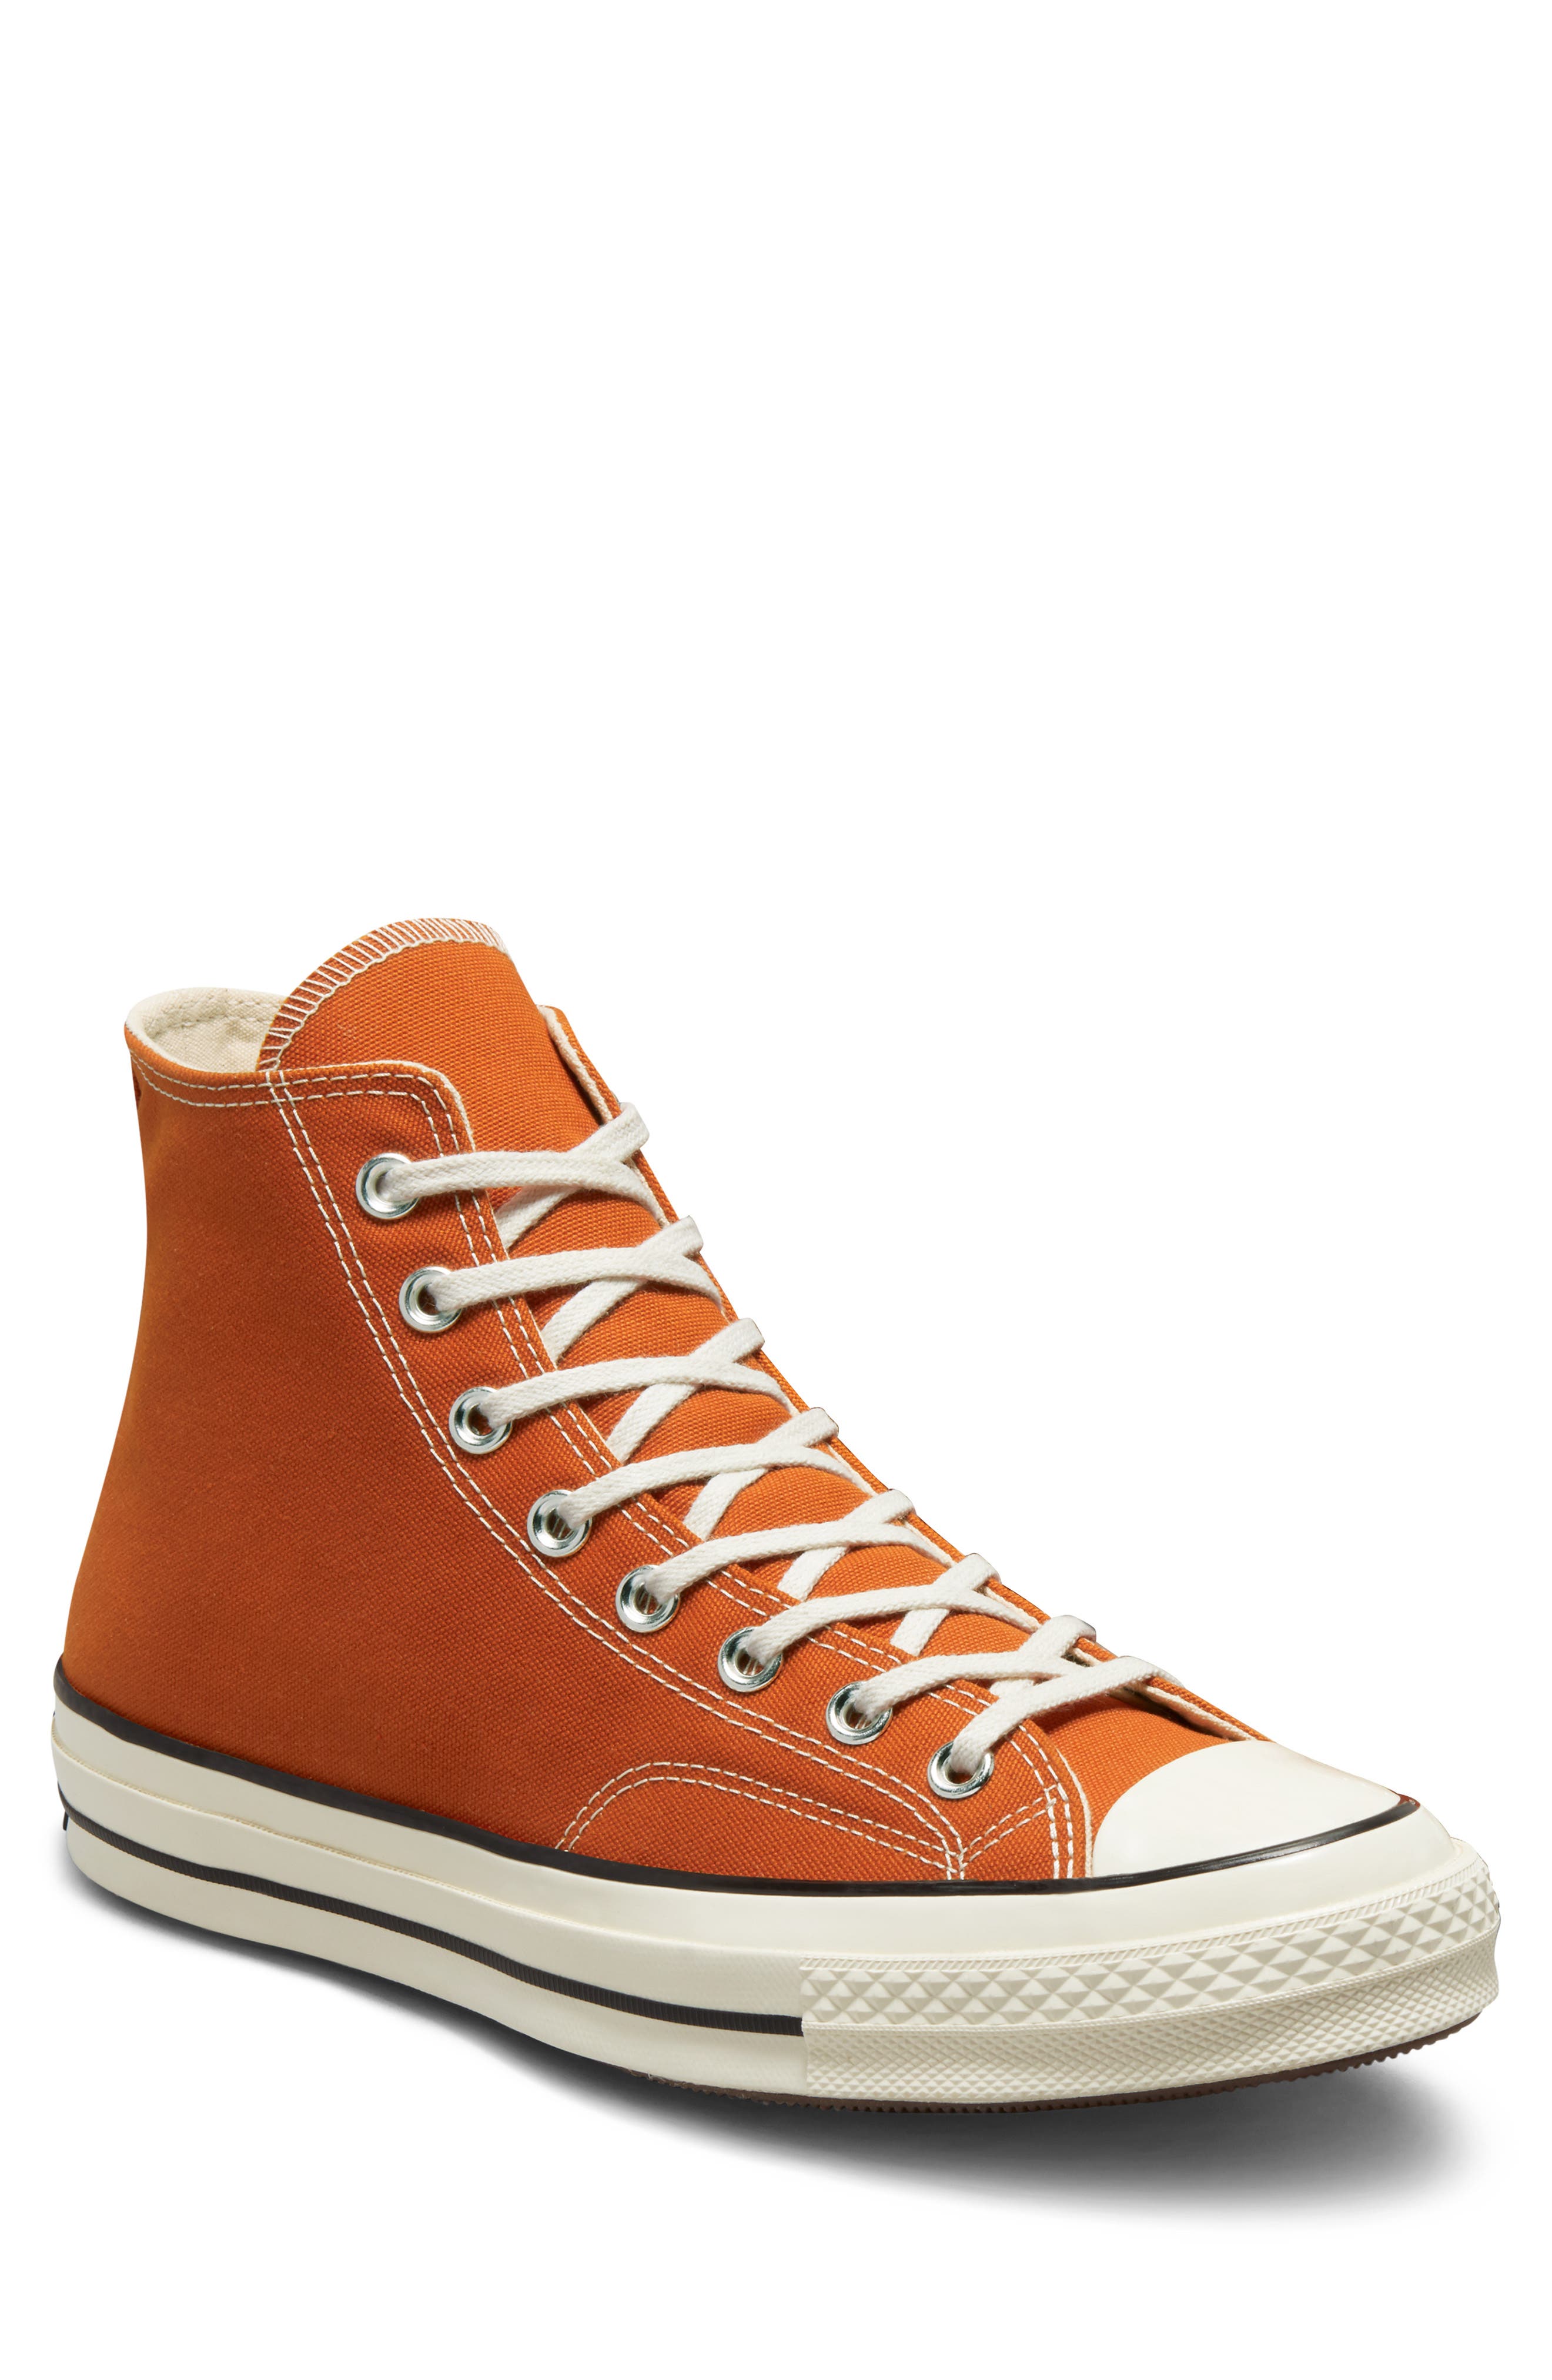 Converse Chuck Taylor(R) All Star(R) 70 High Top Sneaker in University Blue/Egret/Black at Nordstrom